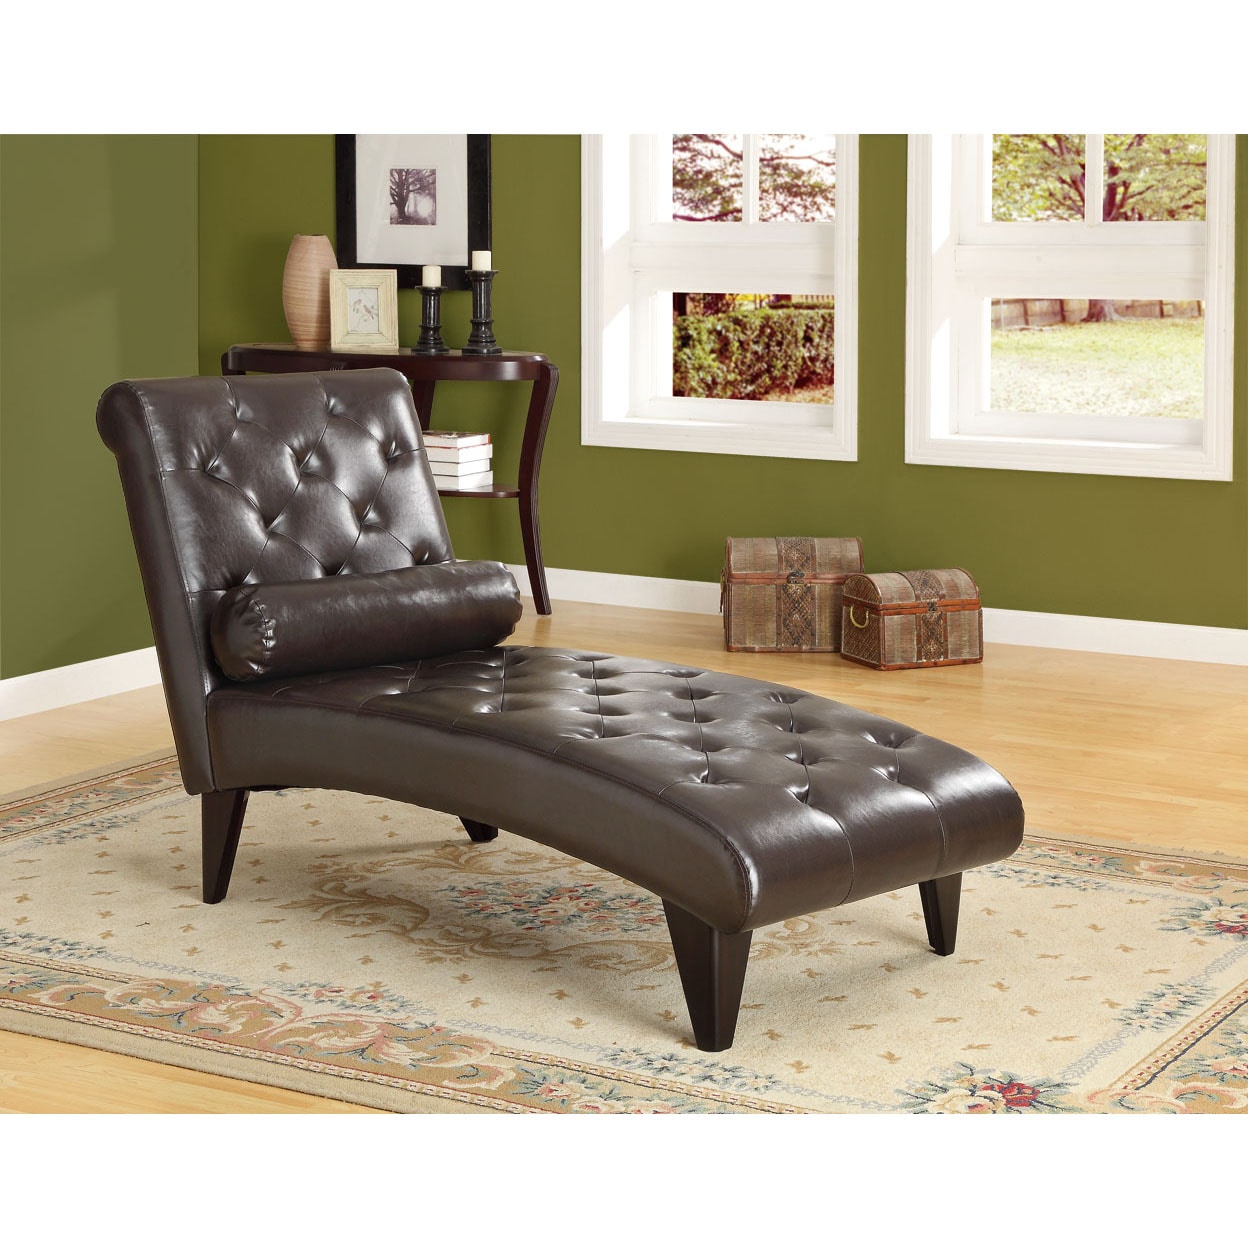 Shop Dark Brown Leather-Look Chaise Lounger with Decorative Roll Pillow